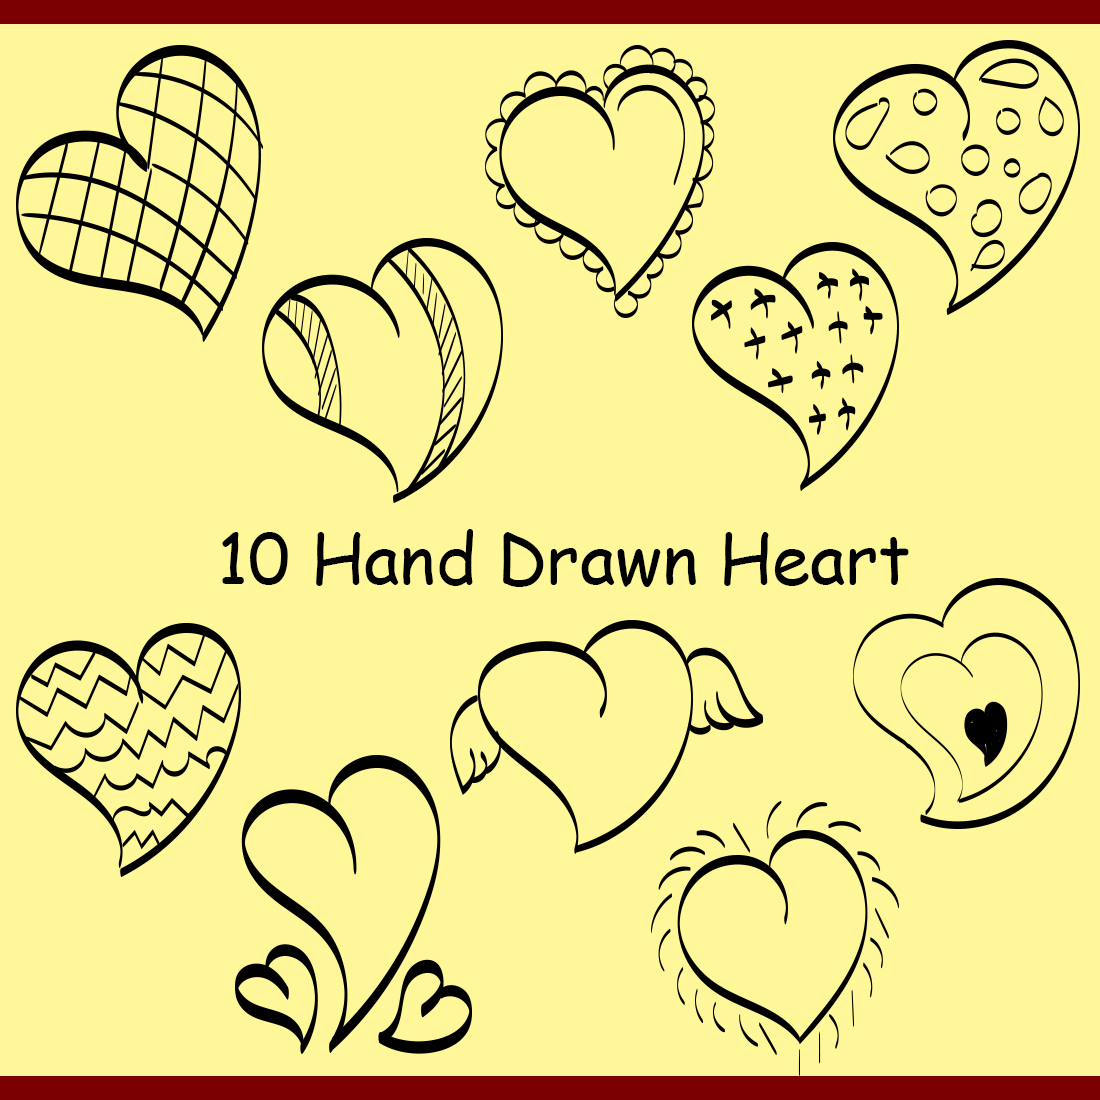 Hand Drawn Heart Graphics cover image.